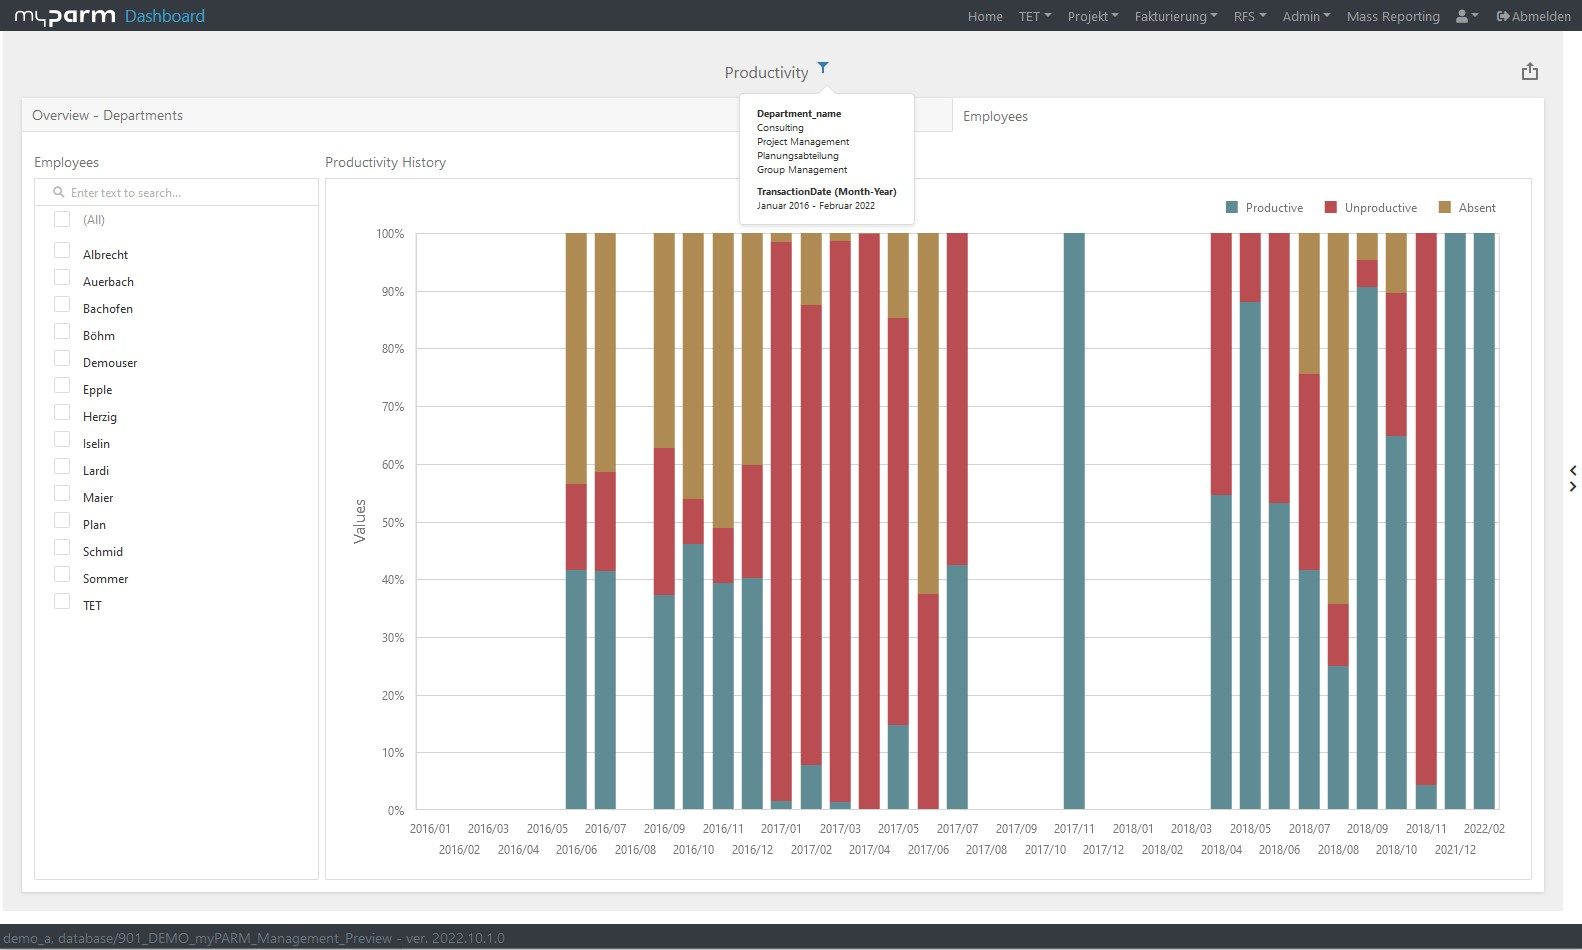 Productivity Details filter applied on departments - overview by employee in myPARM BIact